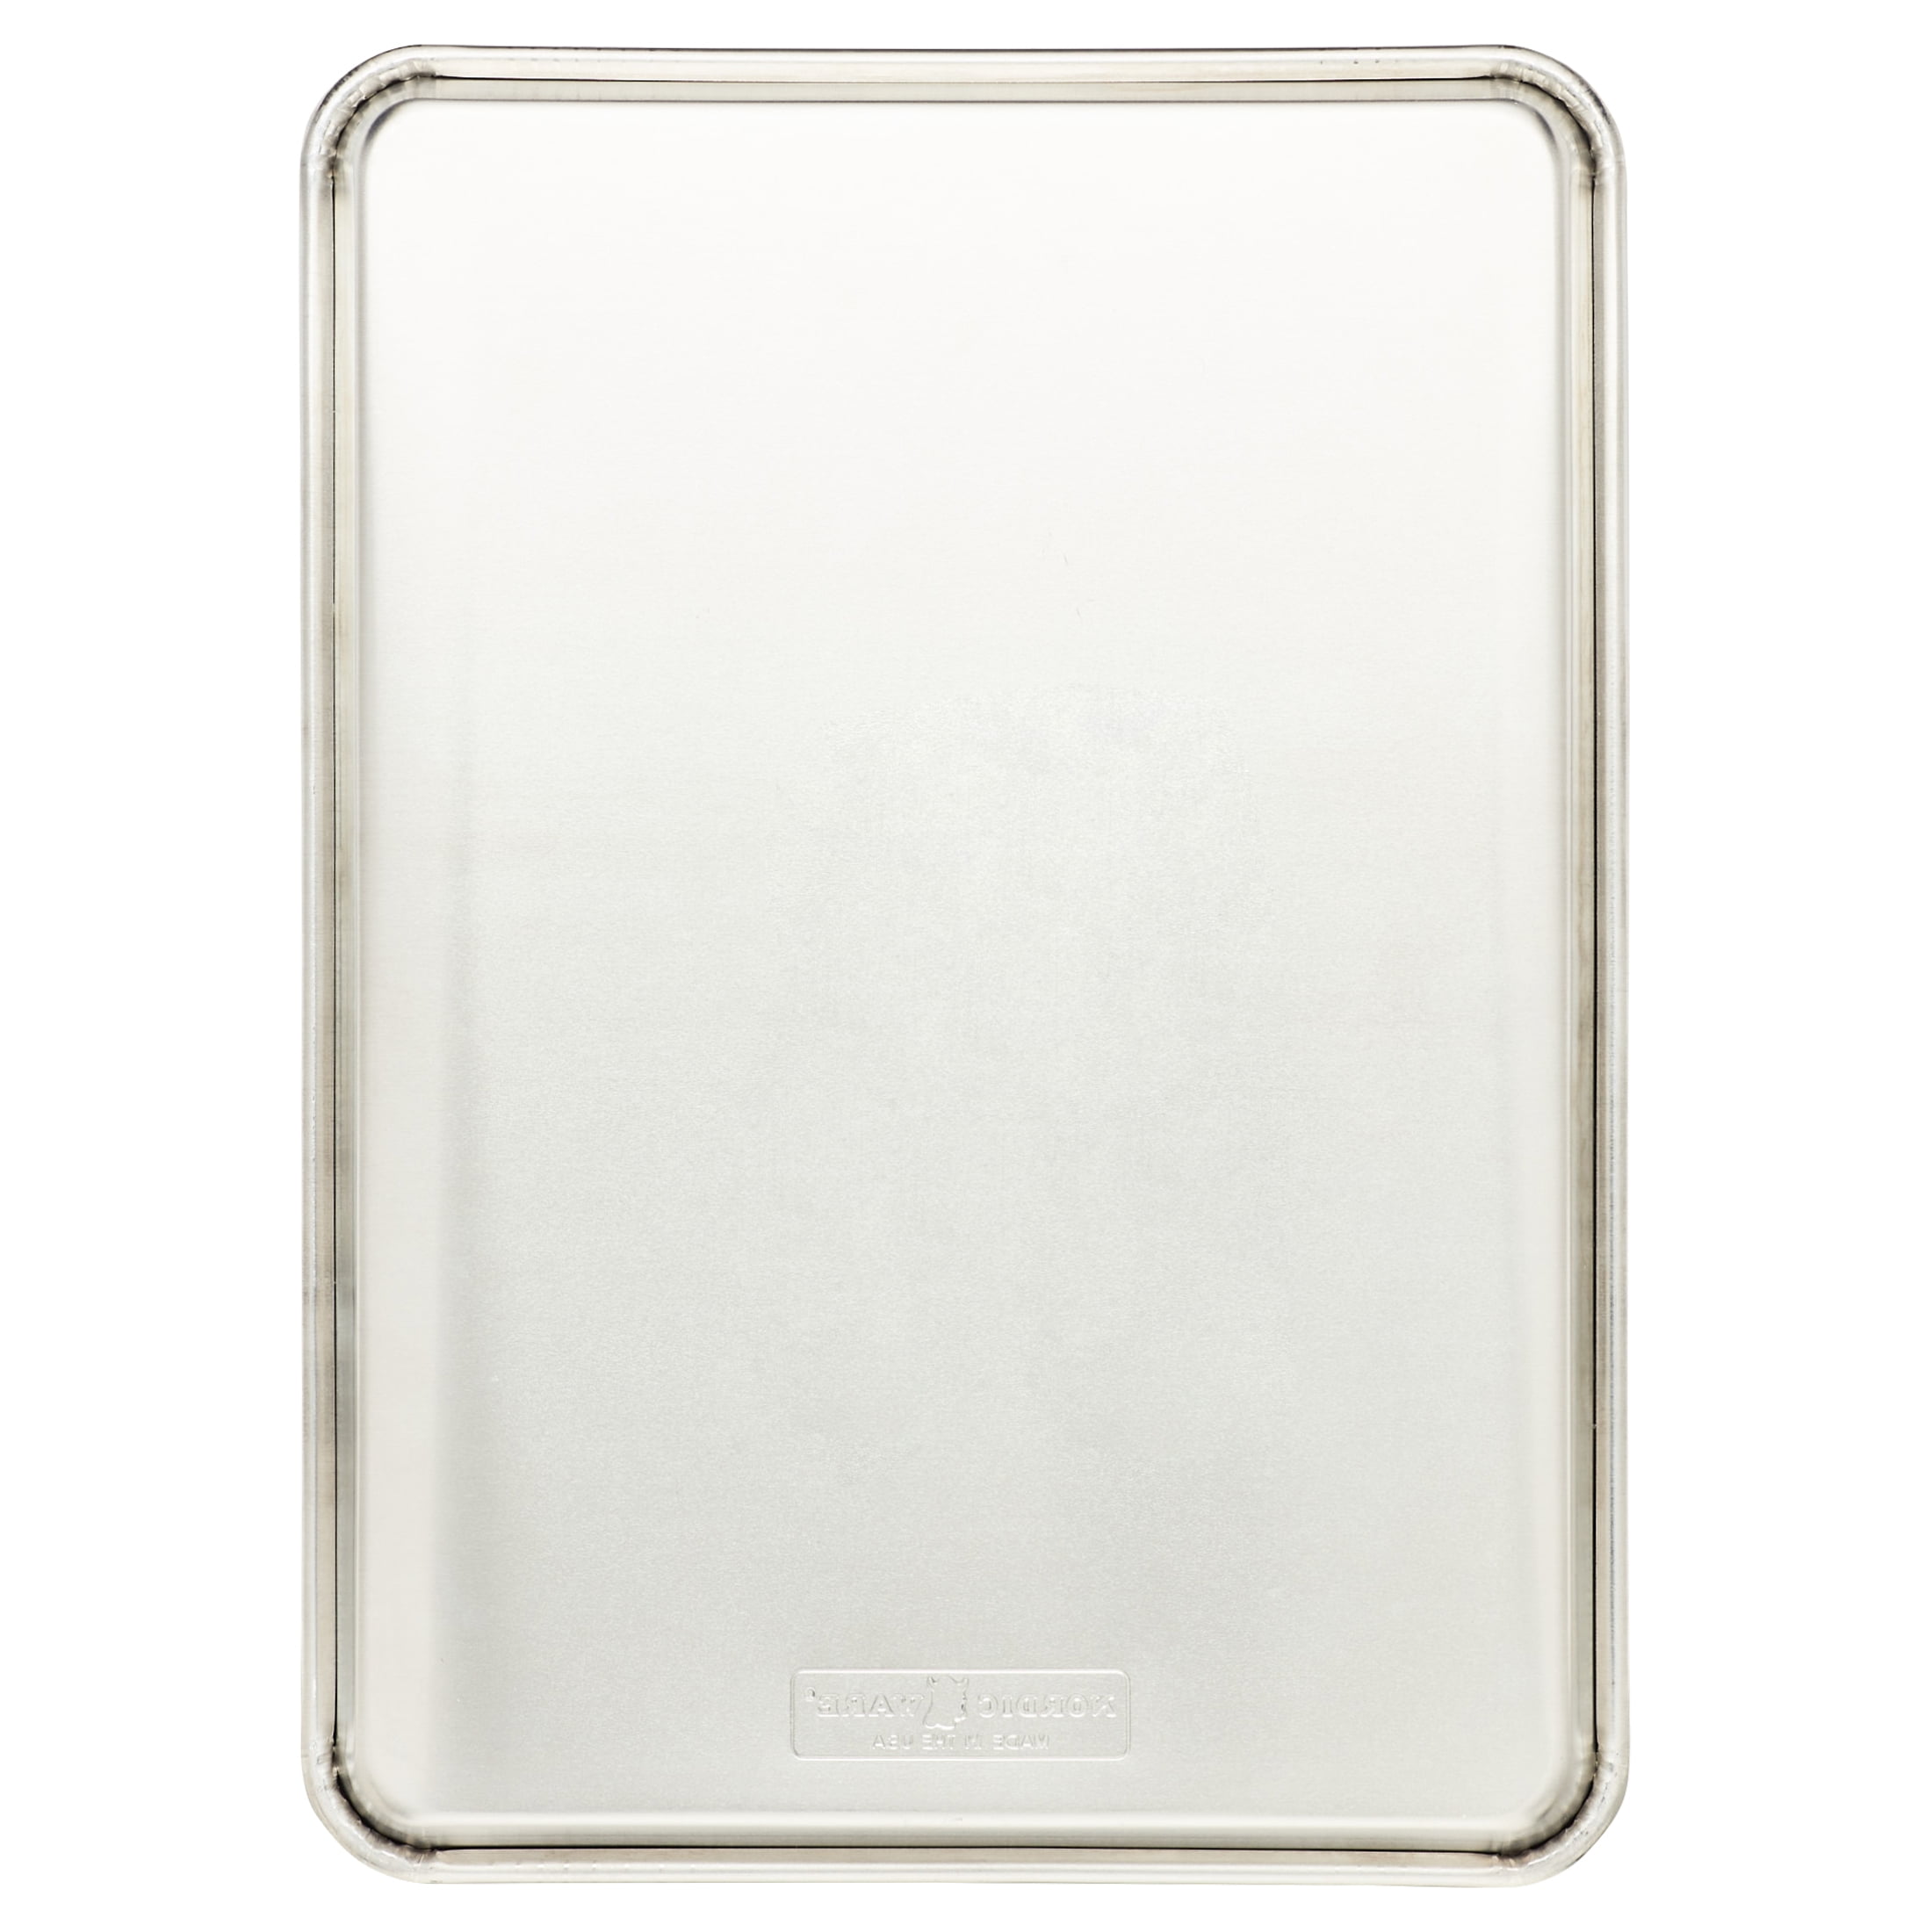 Artisan Professional Classic Aluminum Baking Sheet Pan Set with 18 x  13-inch Half Sheet and Cover